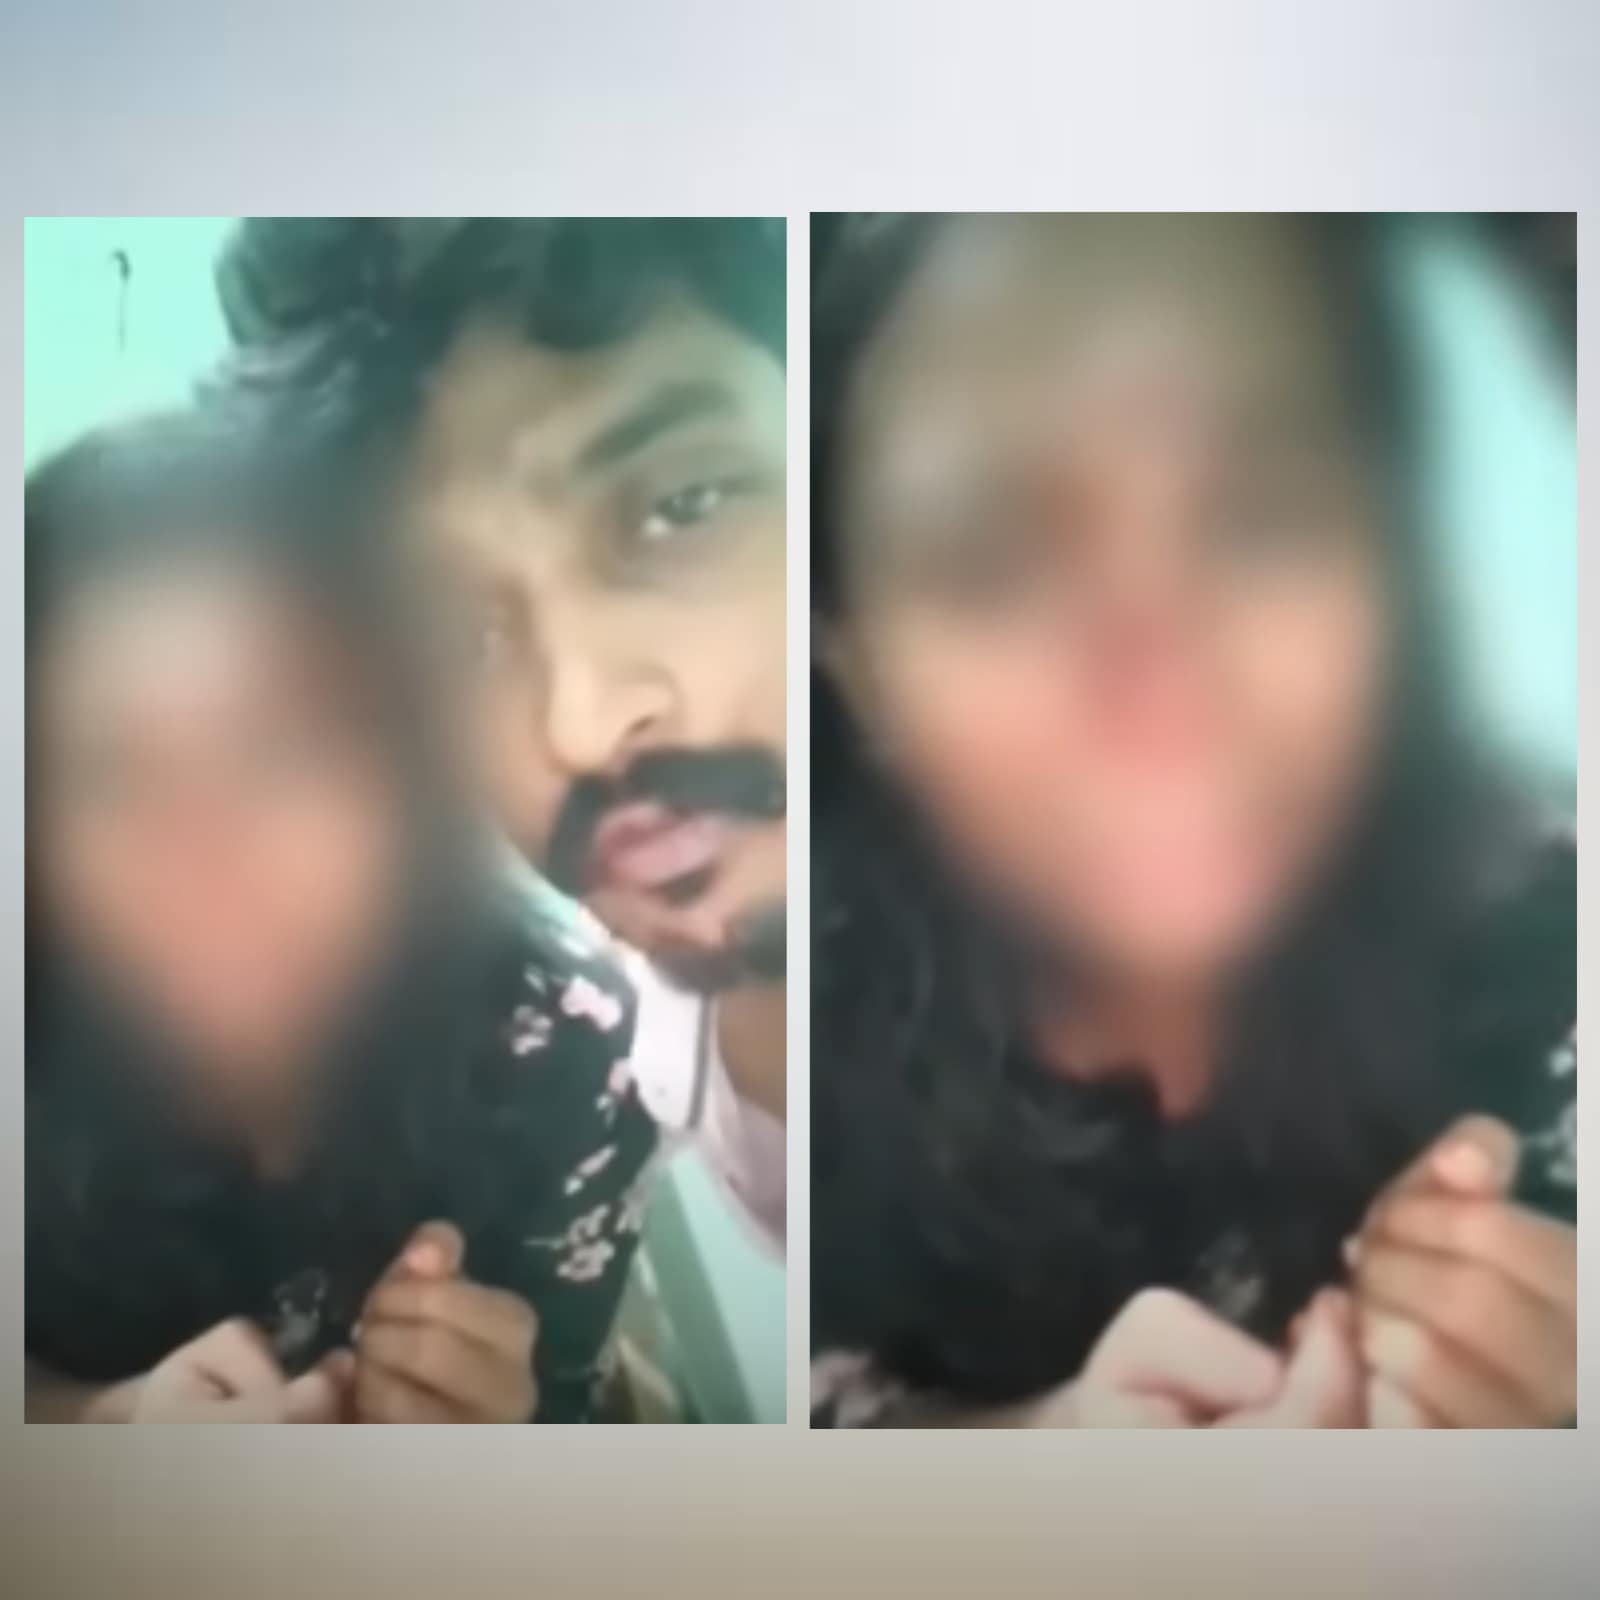 Kerala Man Thrashes Wife, Films Assault, Shares Video With Friends image picture